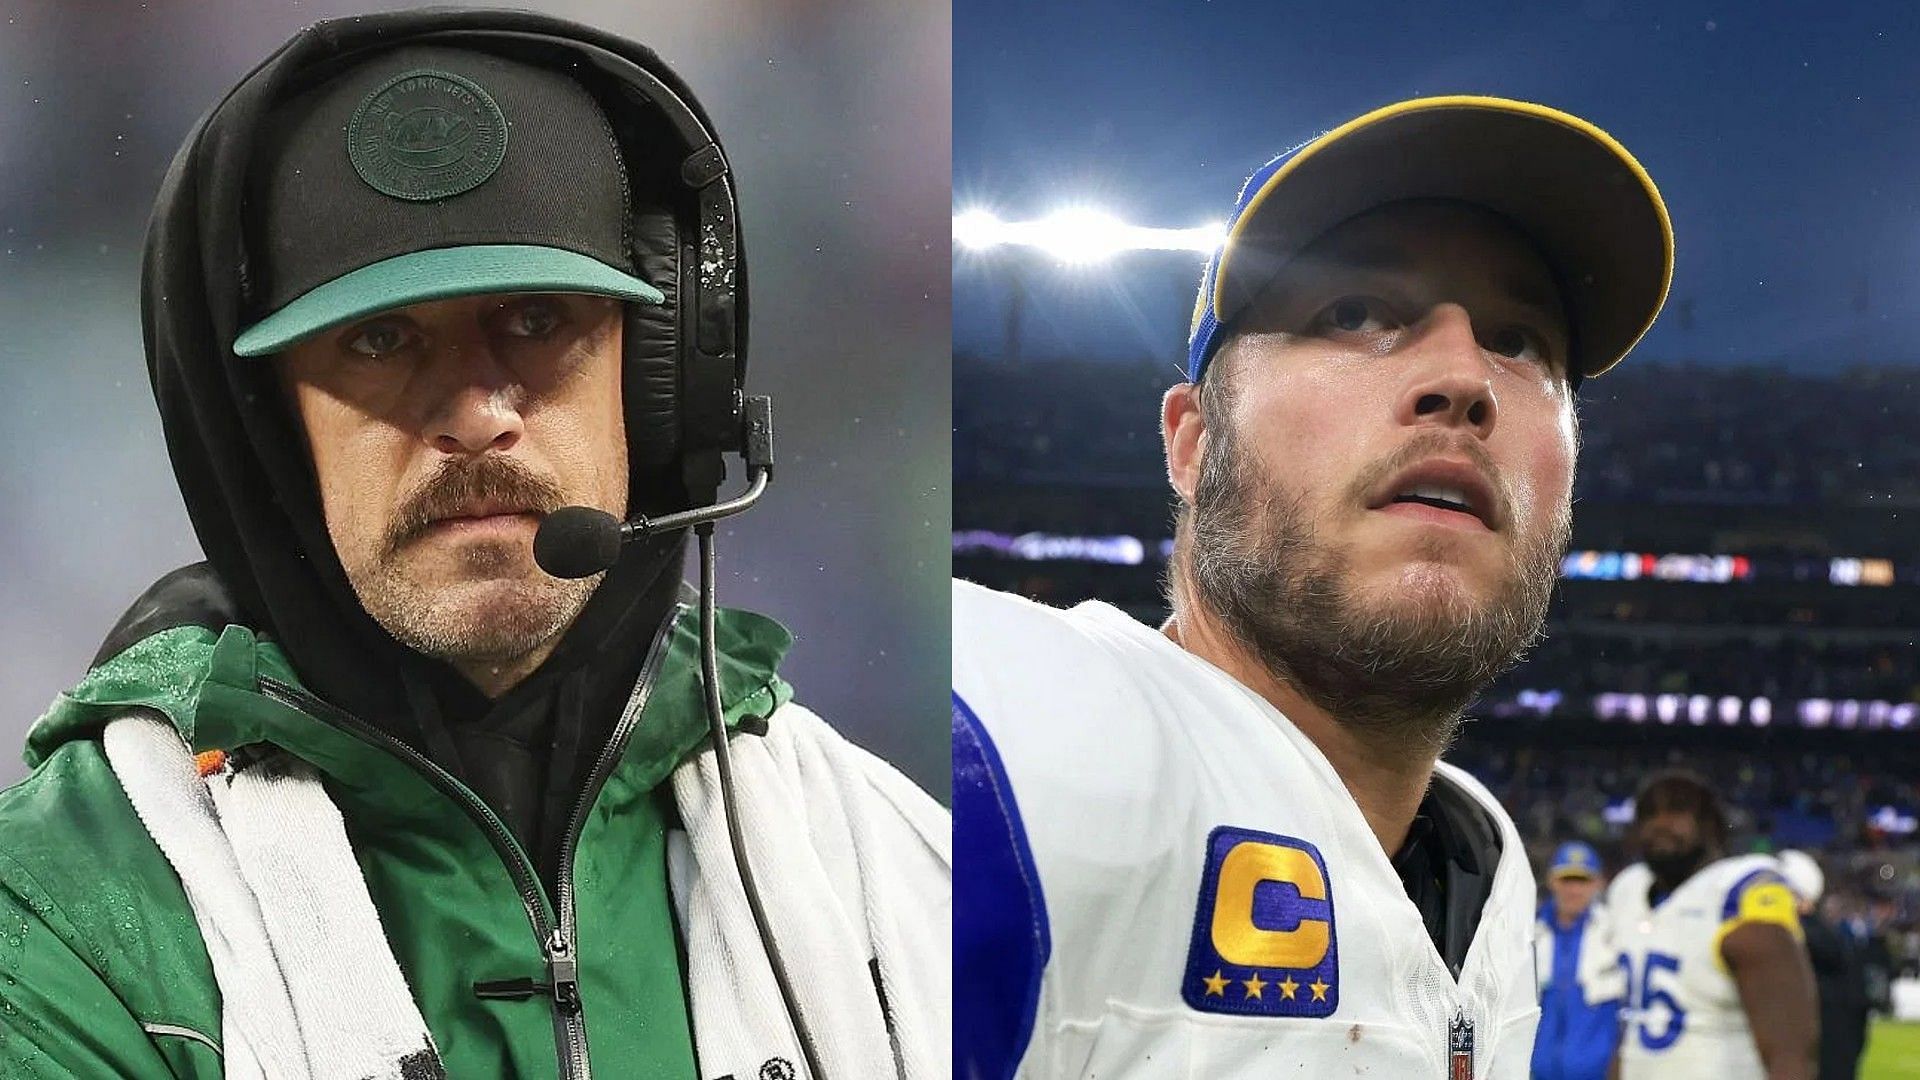 Rams were hoping to trade Matthew Stafford to Jets before Aaron Rodgers&rsquo; arrival, NFL analyst claims